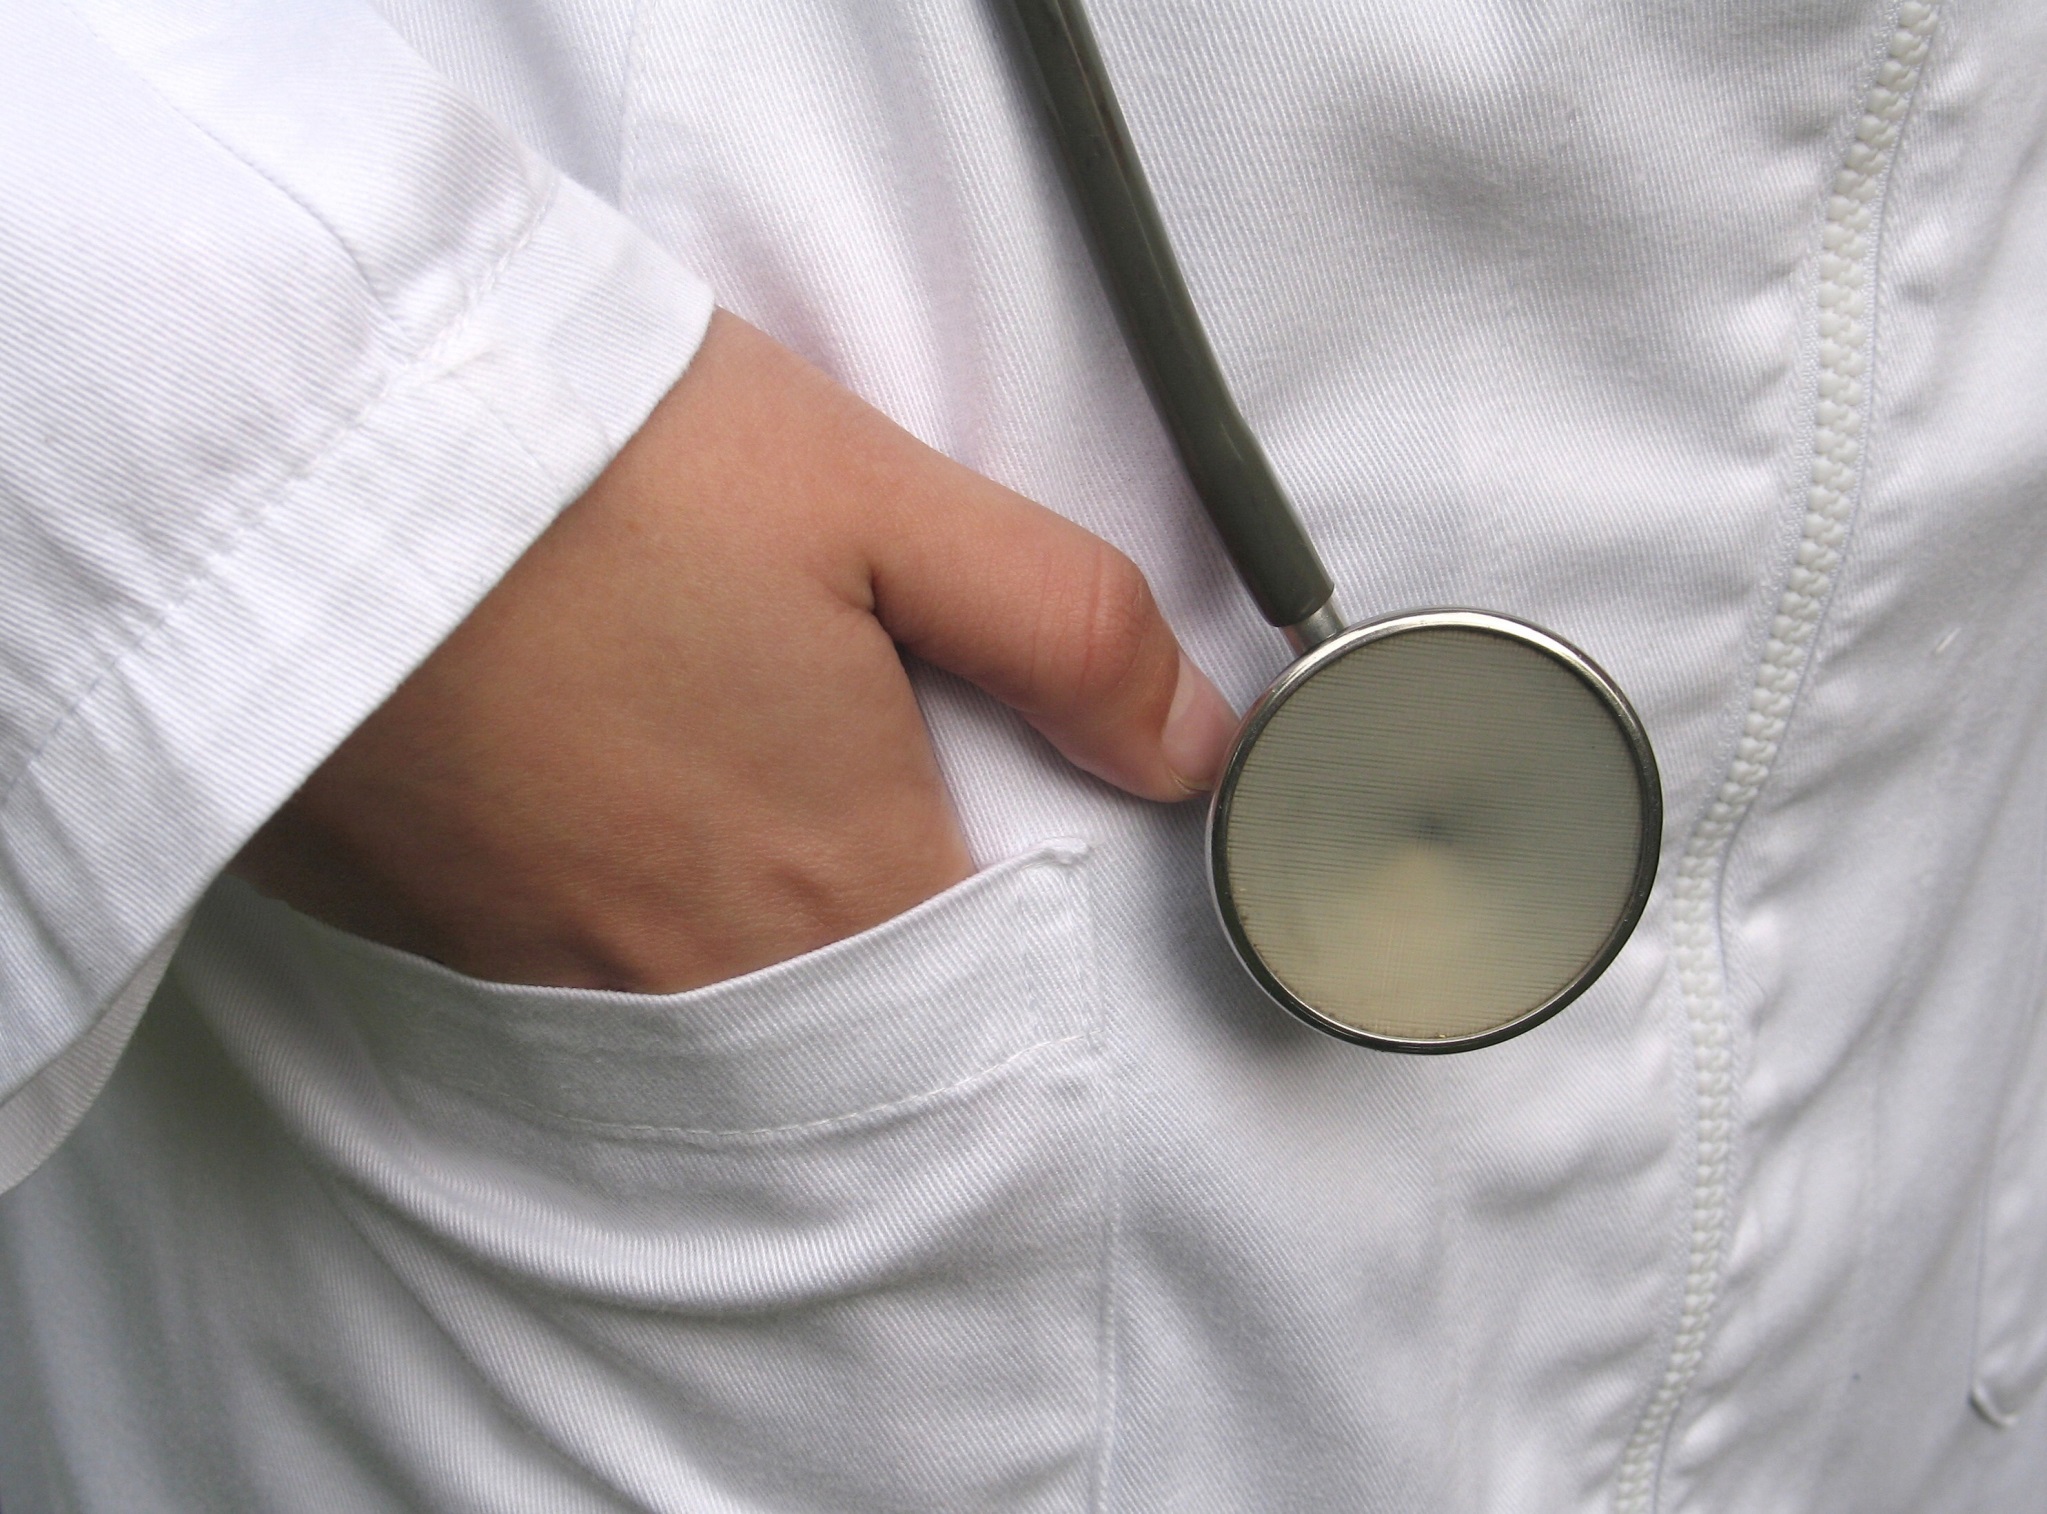 Another physician group raises concerns about DTC